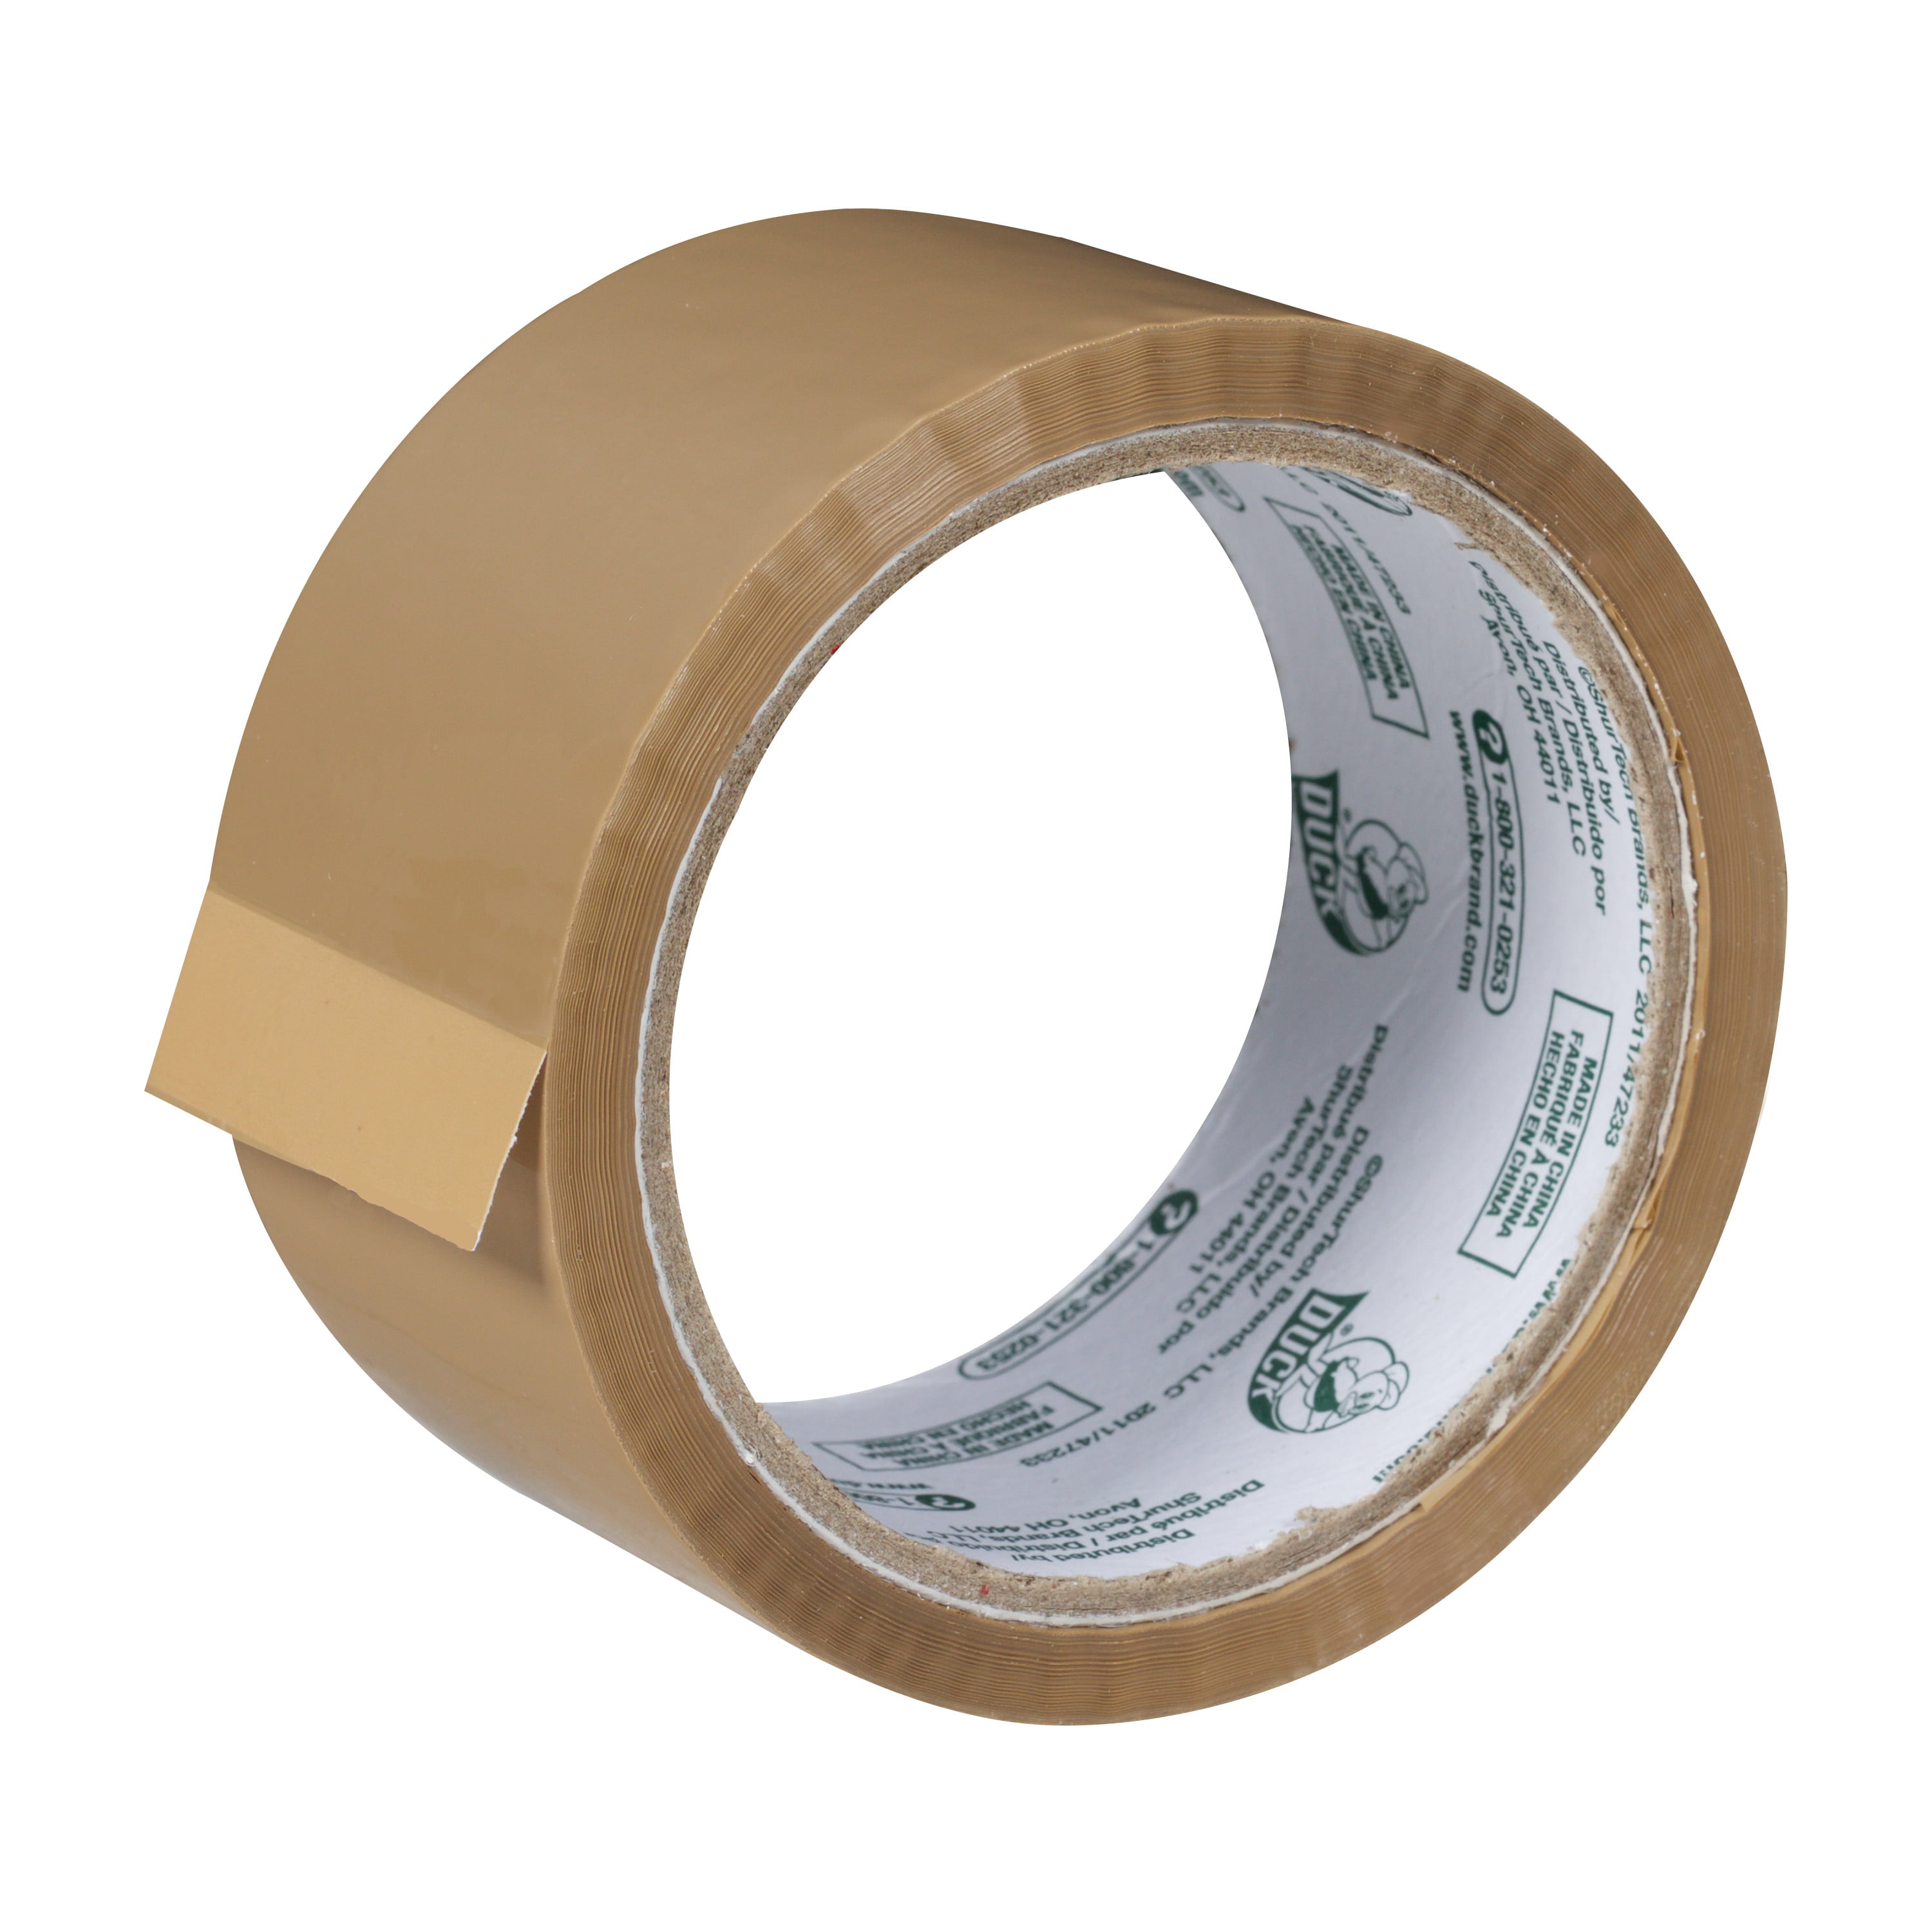 Brown Acrylic Packing Tape - Dan The Mover